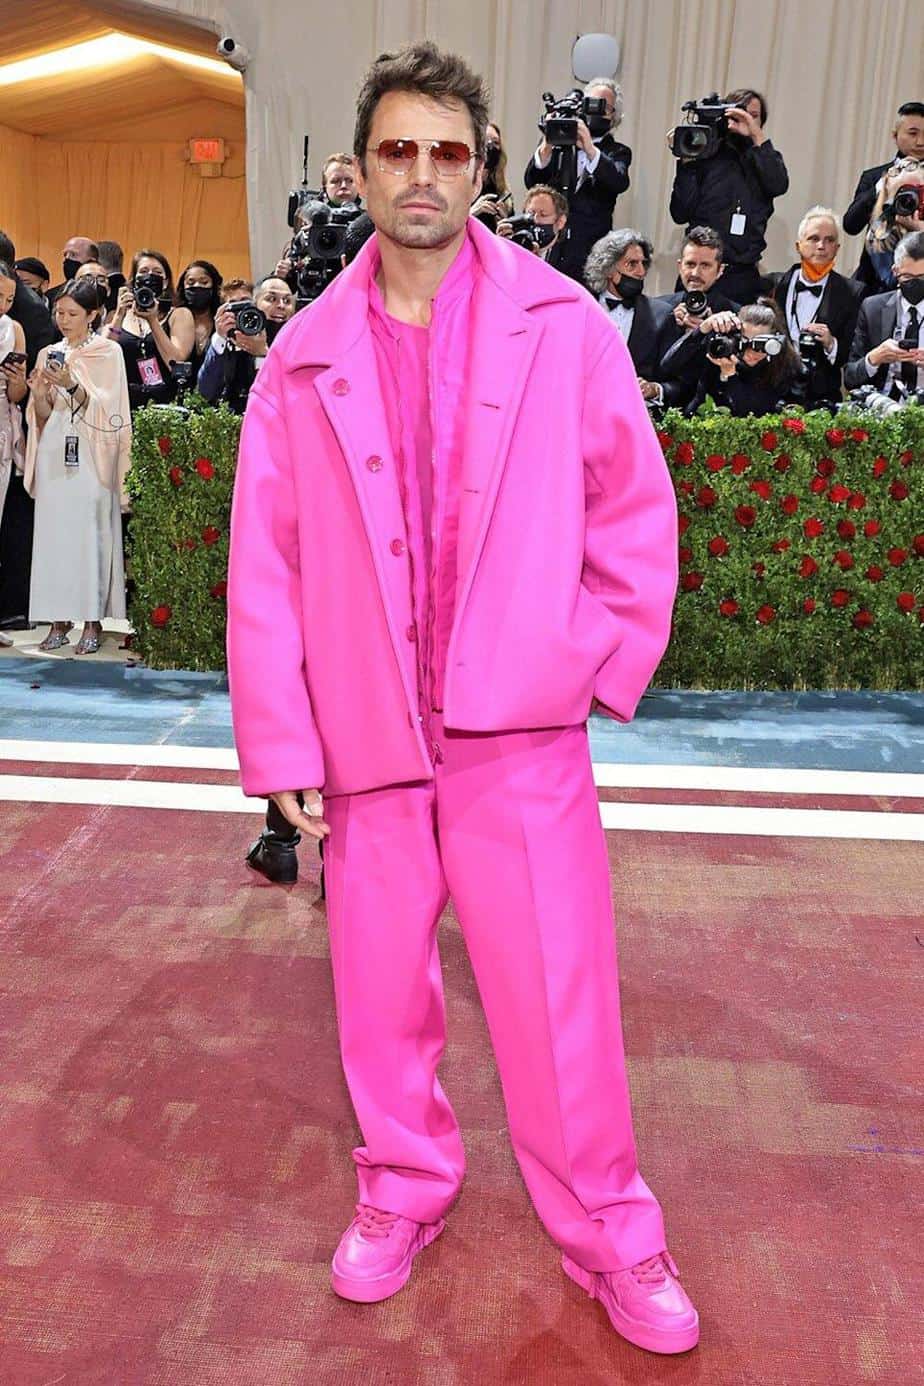 The Winter Soldier star was dressed in all pink at the 2022 Met Gala event (source Yahoo Life UK)